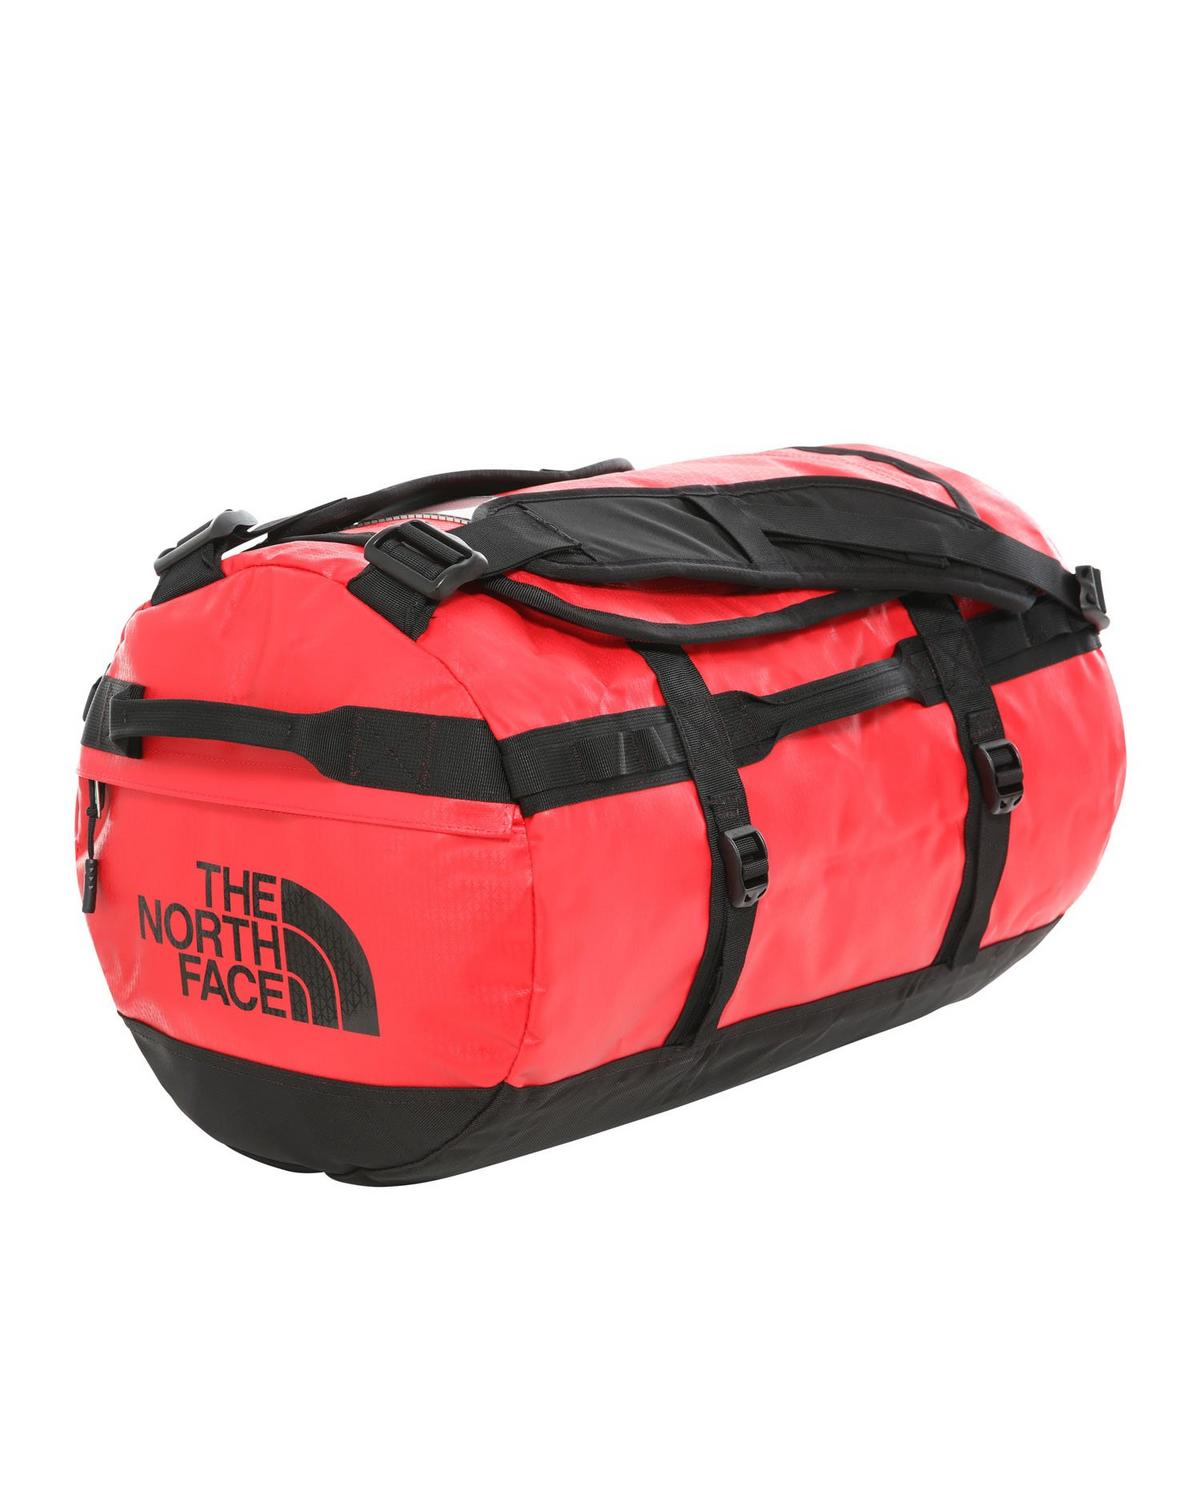 The North Face Small Base Camp Duffel Bag -  Red